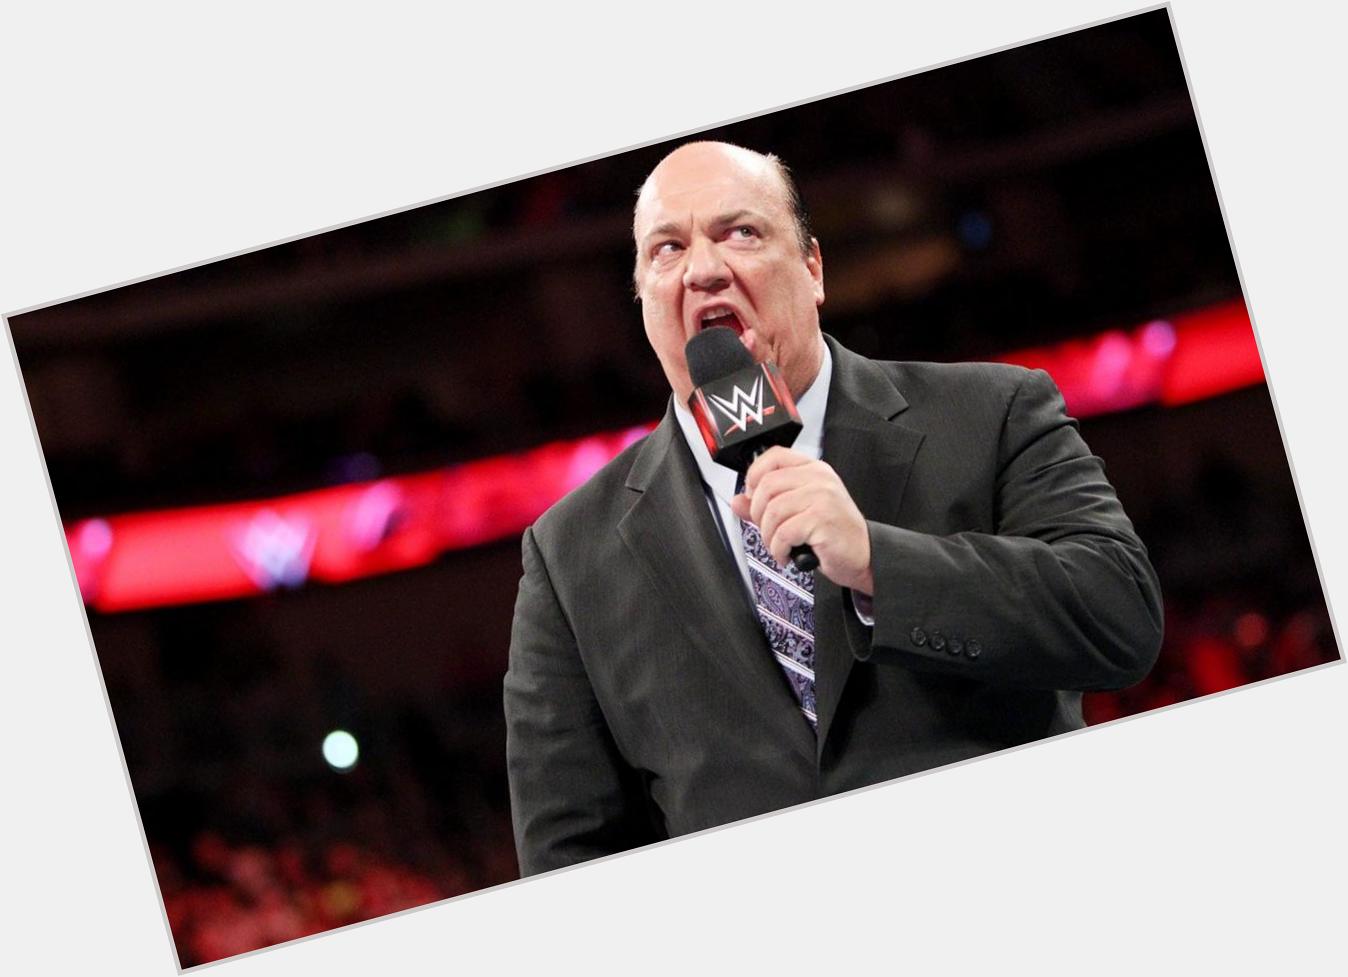 Ladies and gentlemen...lets all wish the one and only Paul Heyman a Happy Birthday as he turns 53 today! 